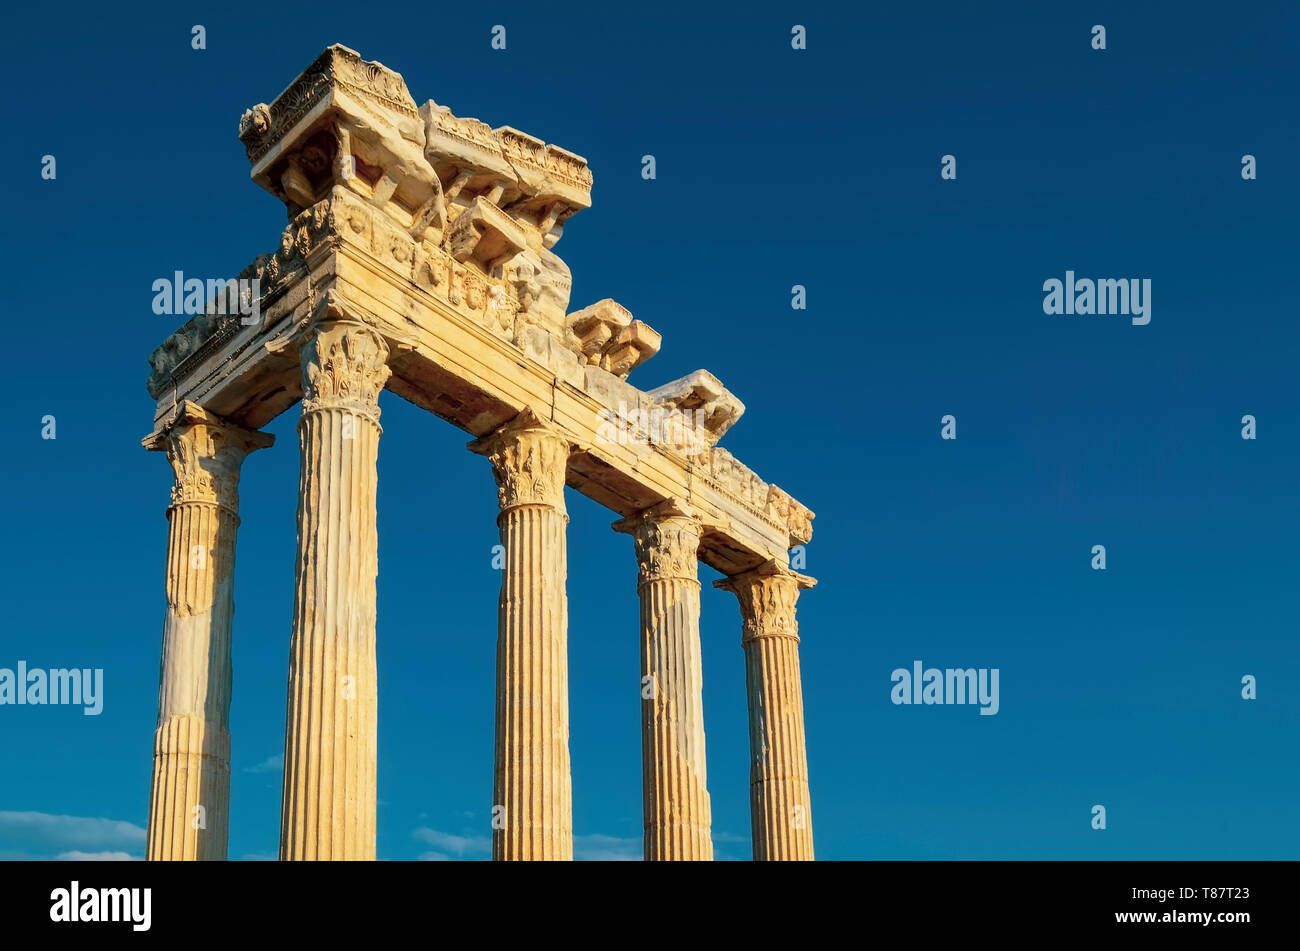 The ruins of the Temple of Apollo in ancient city of Side in Turkey against the blue sky Stock Photo